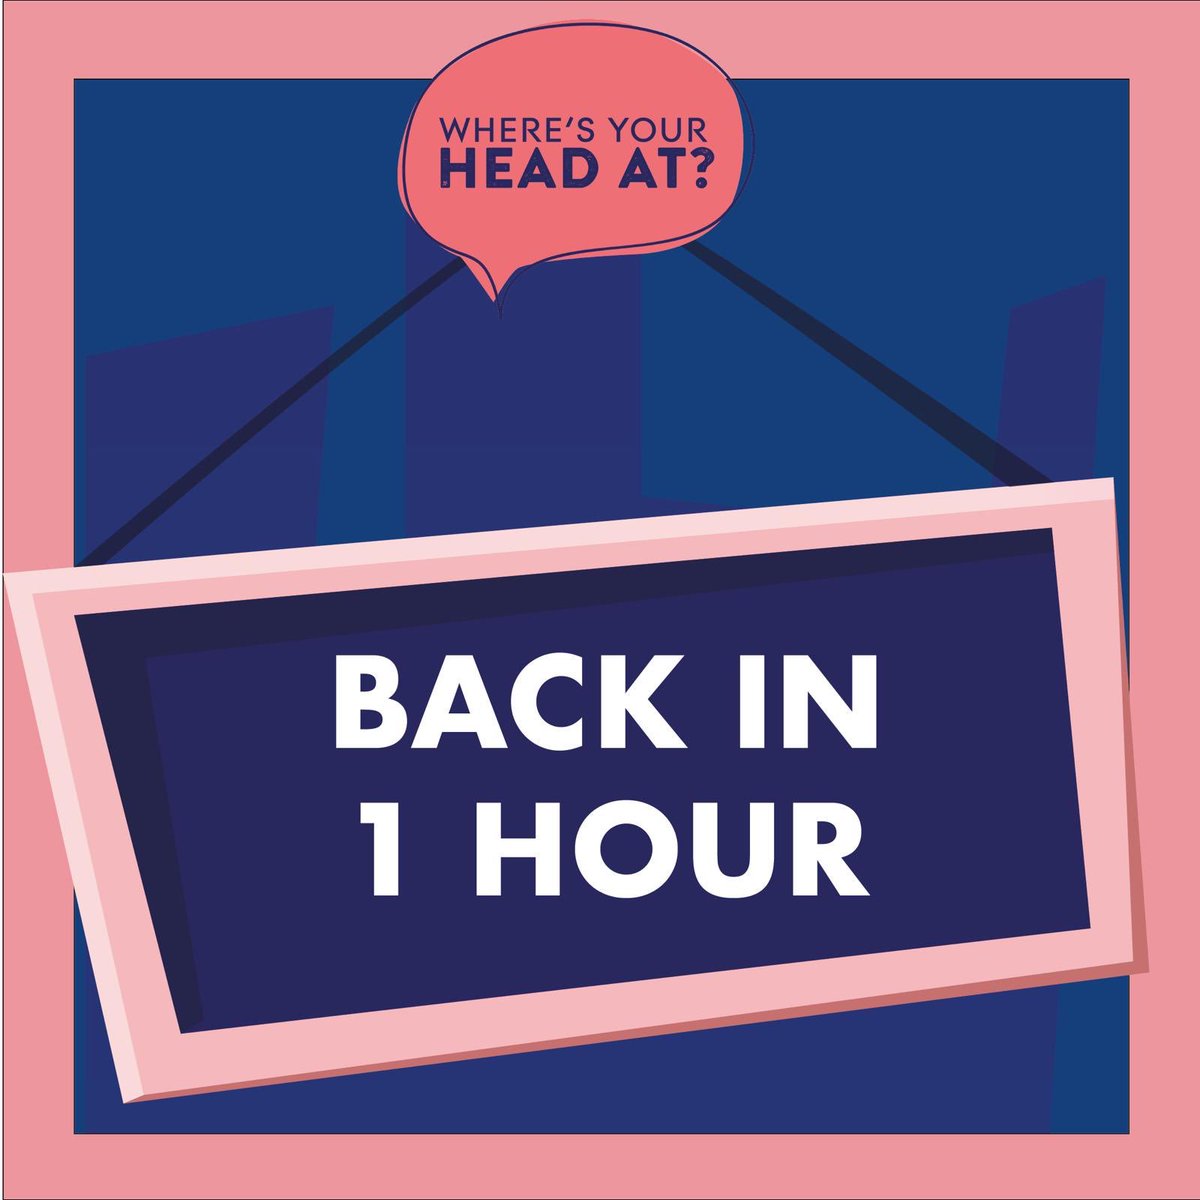 Nothing to see here for the next hour! We’re spending an hour off social media for #WMHD19 - join us by posting your own ‘back in an hour’ sign #wheresyourheadat